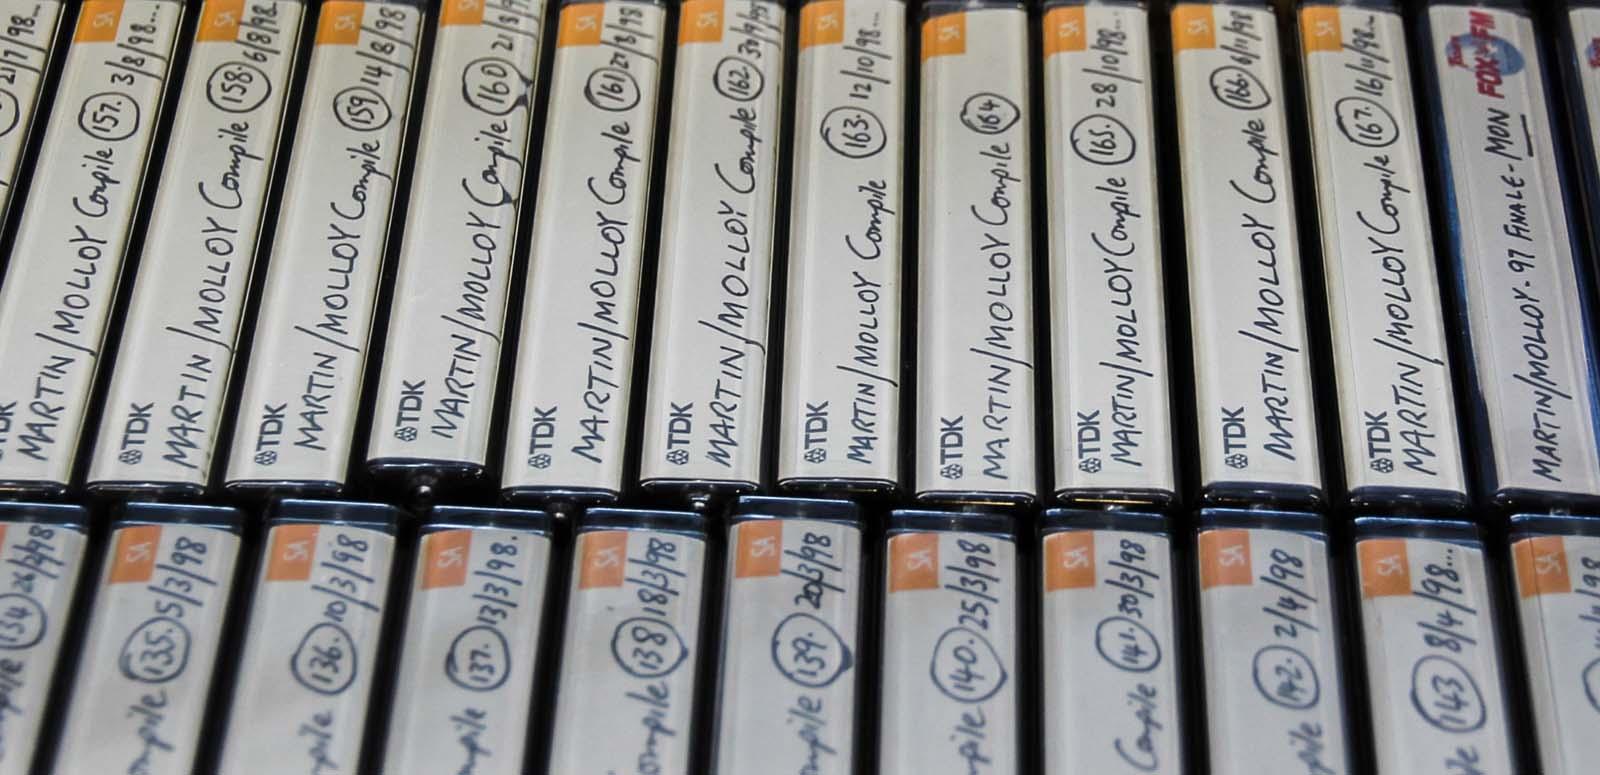 A collection of analogue cassette tapes of the Martin/Molloy radio show